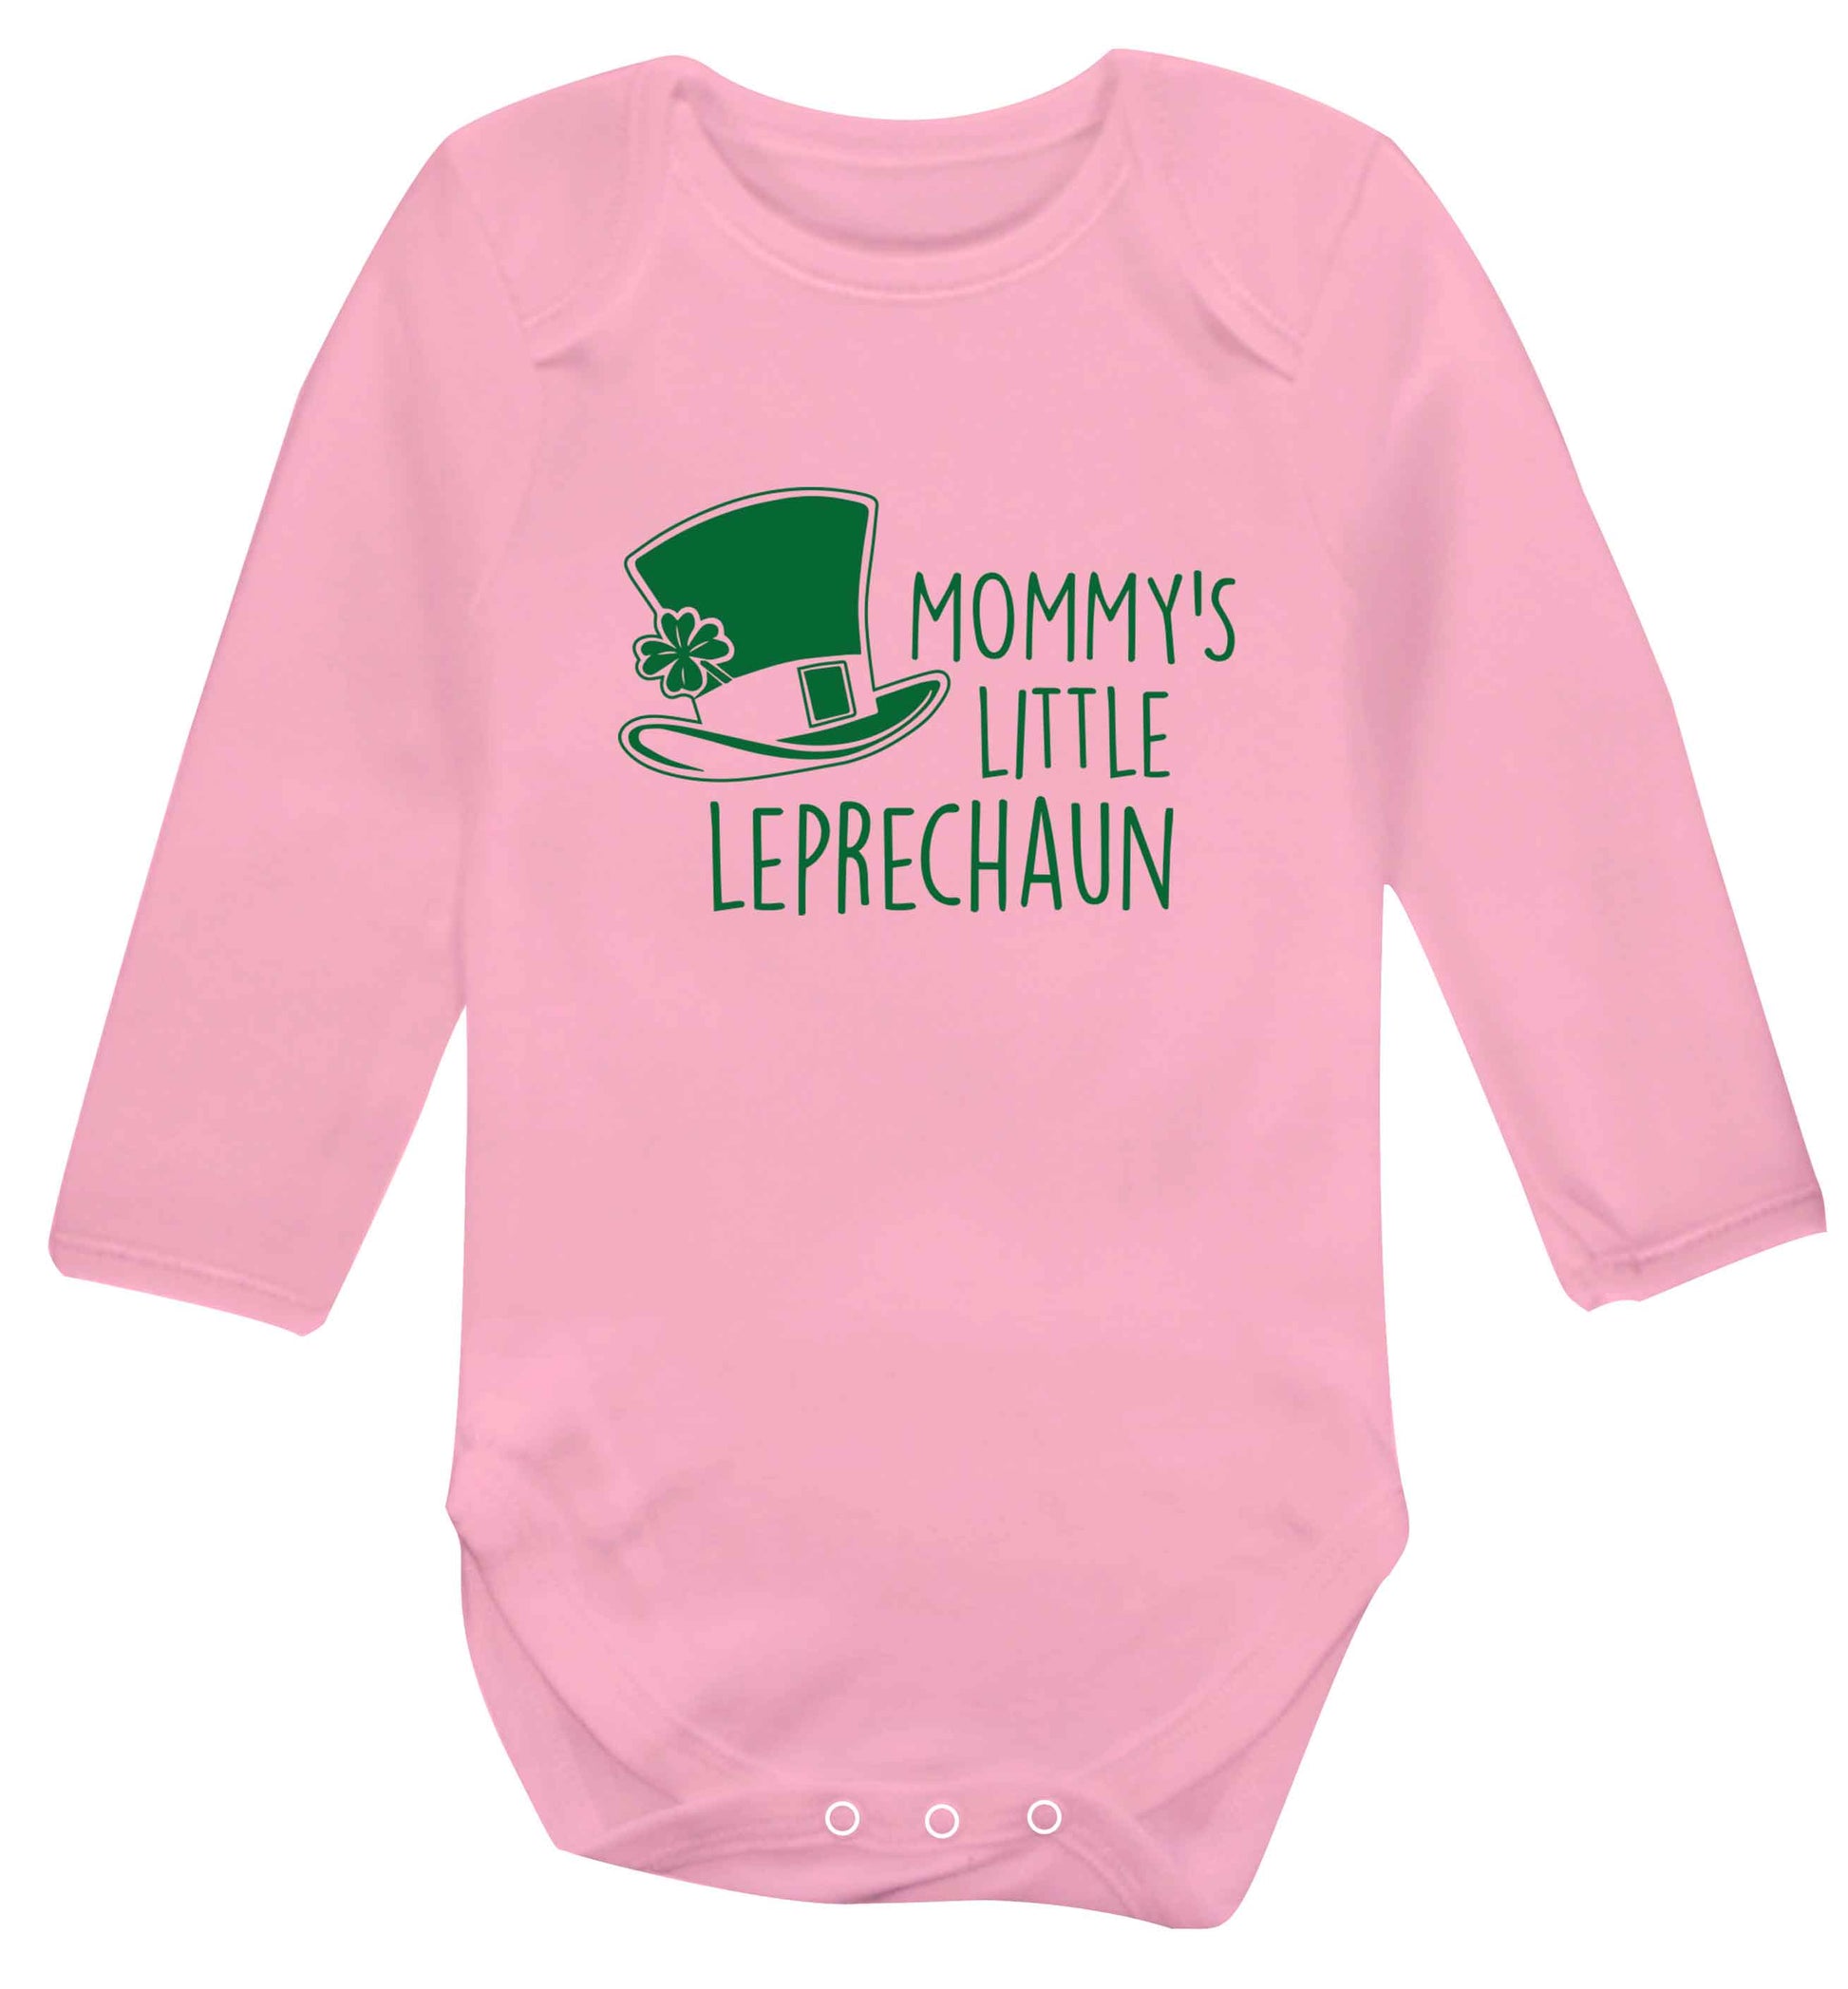 Mommy's little leprechaun baby vest long sleeved pale pink 6-12 months